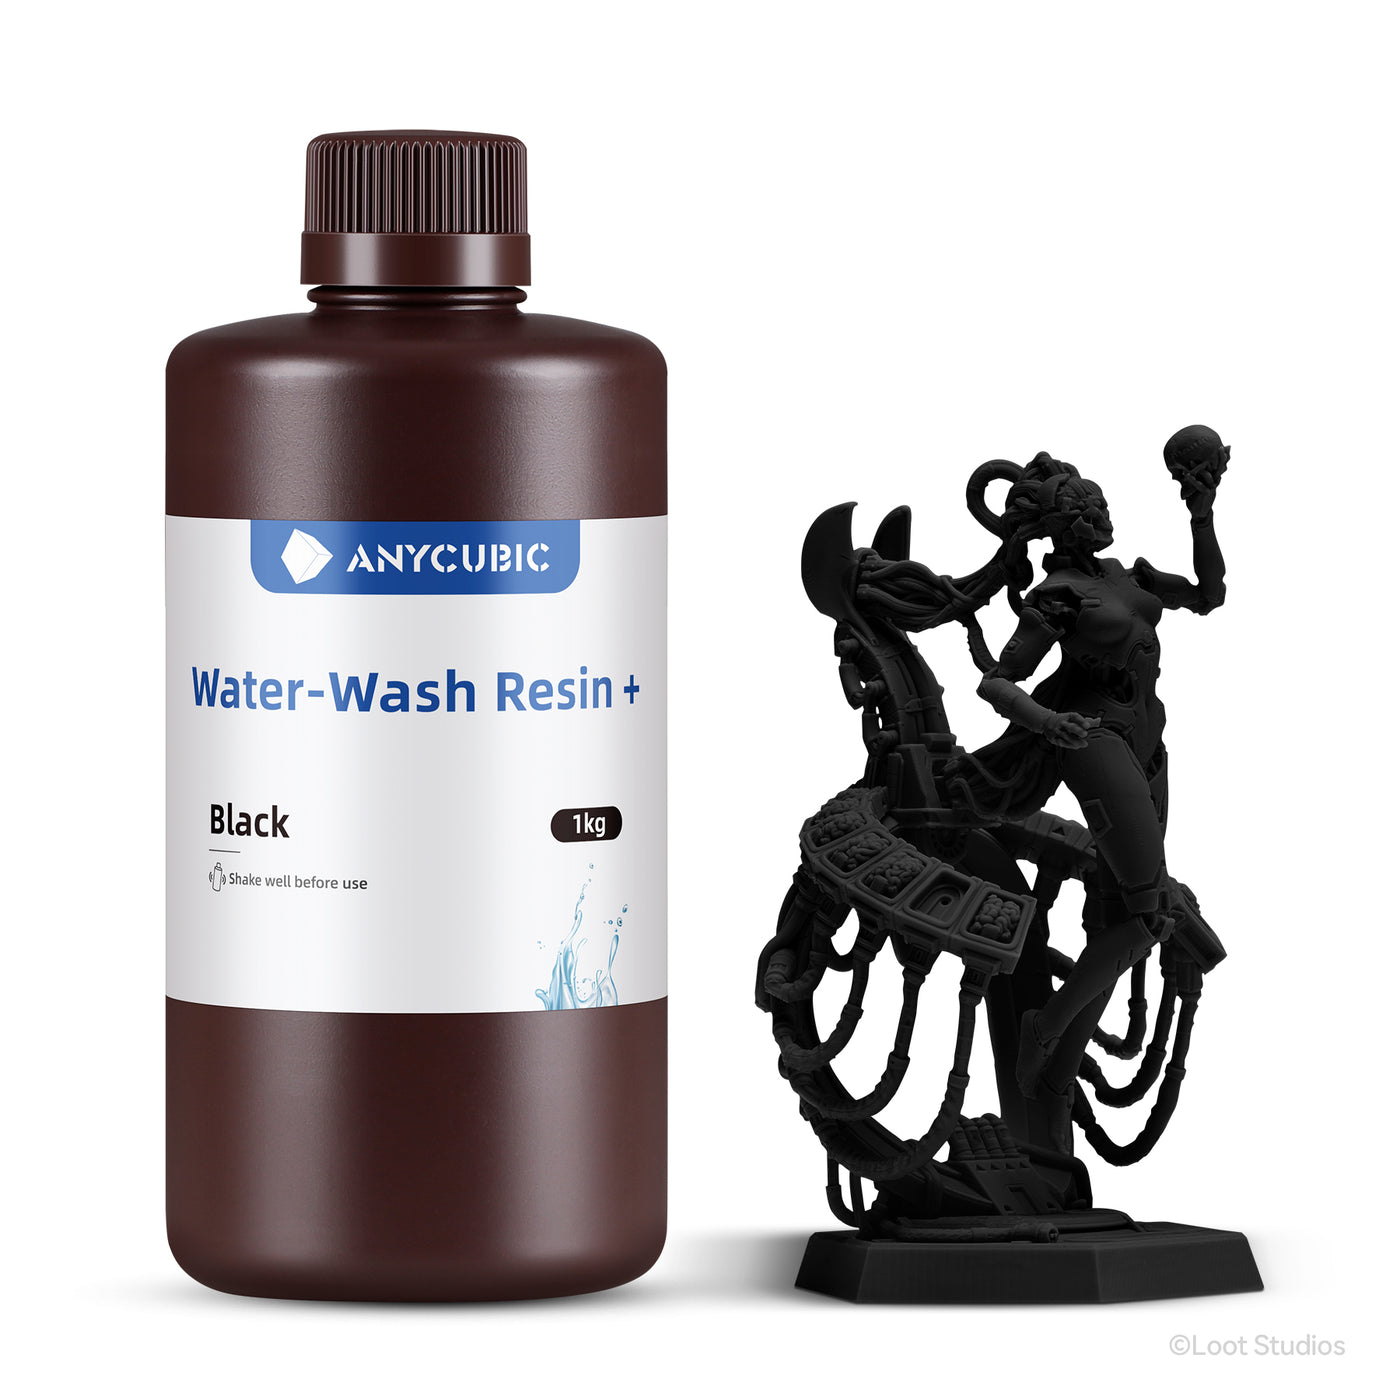 Anycubic Resina Lavable+: resinas ecológicas lavables con agua